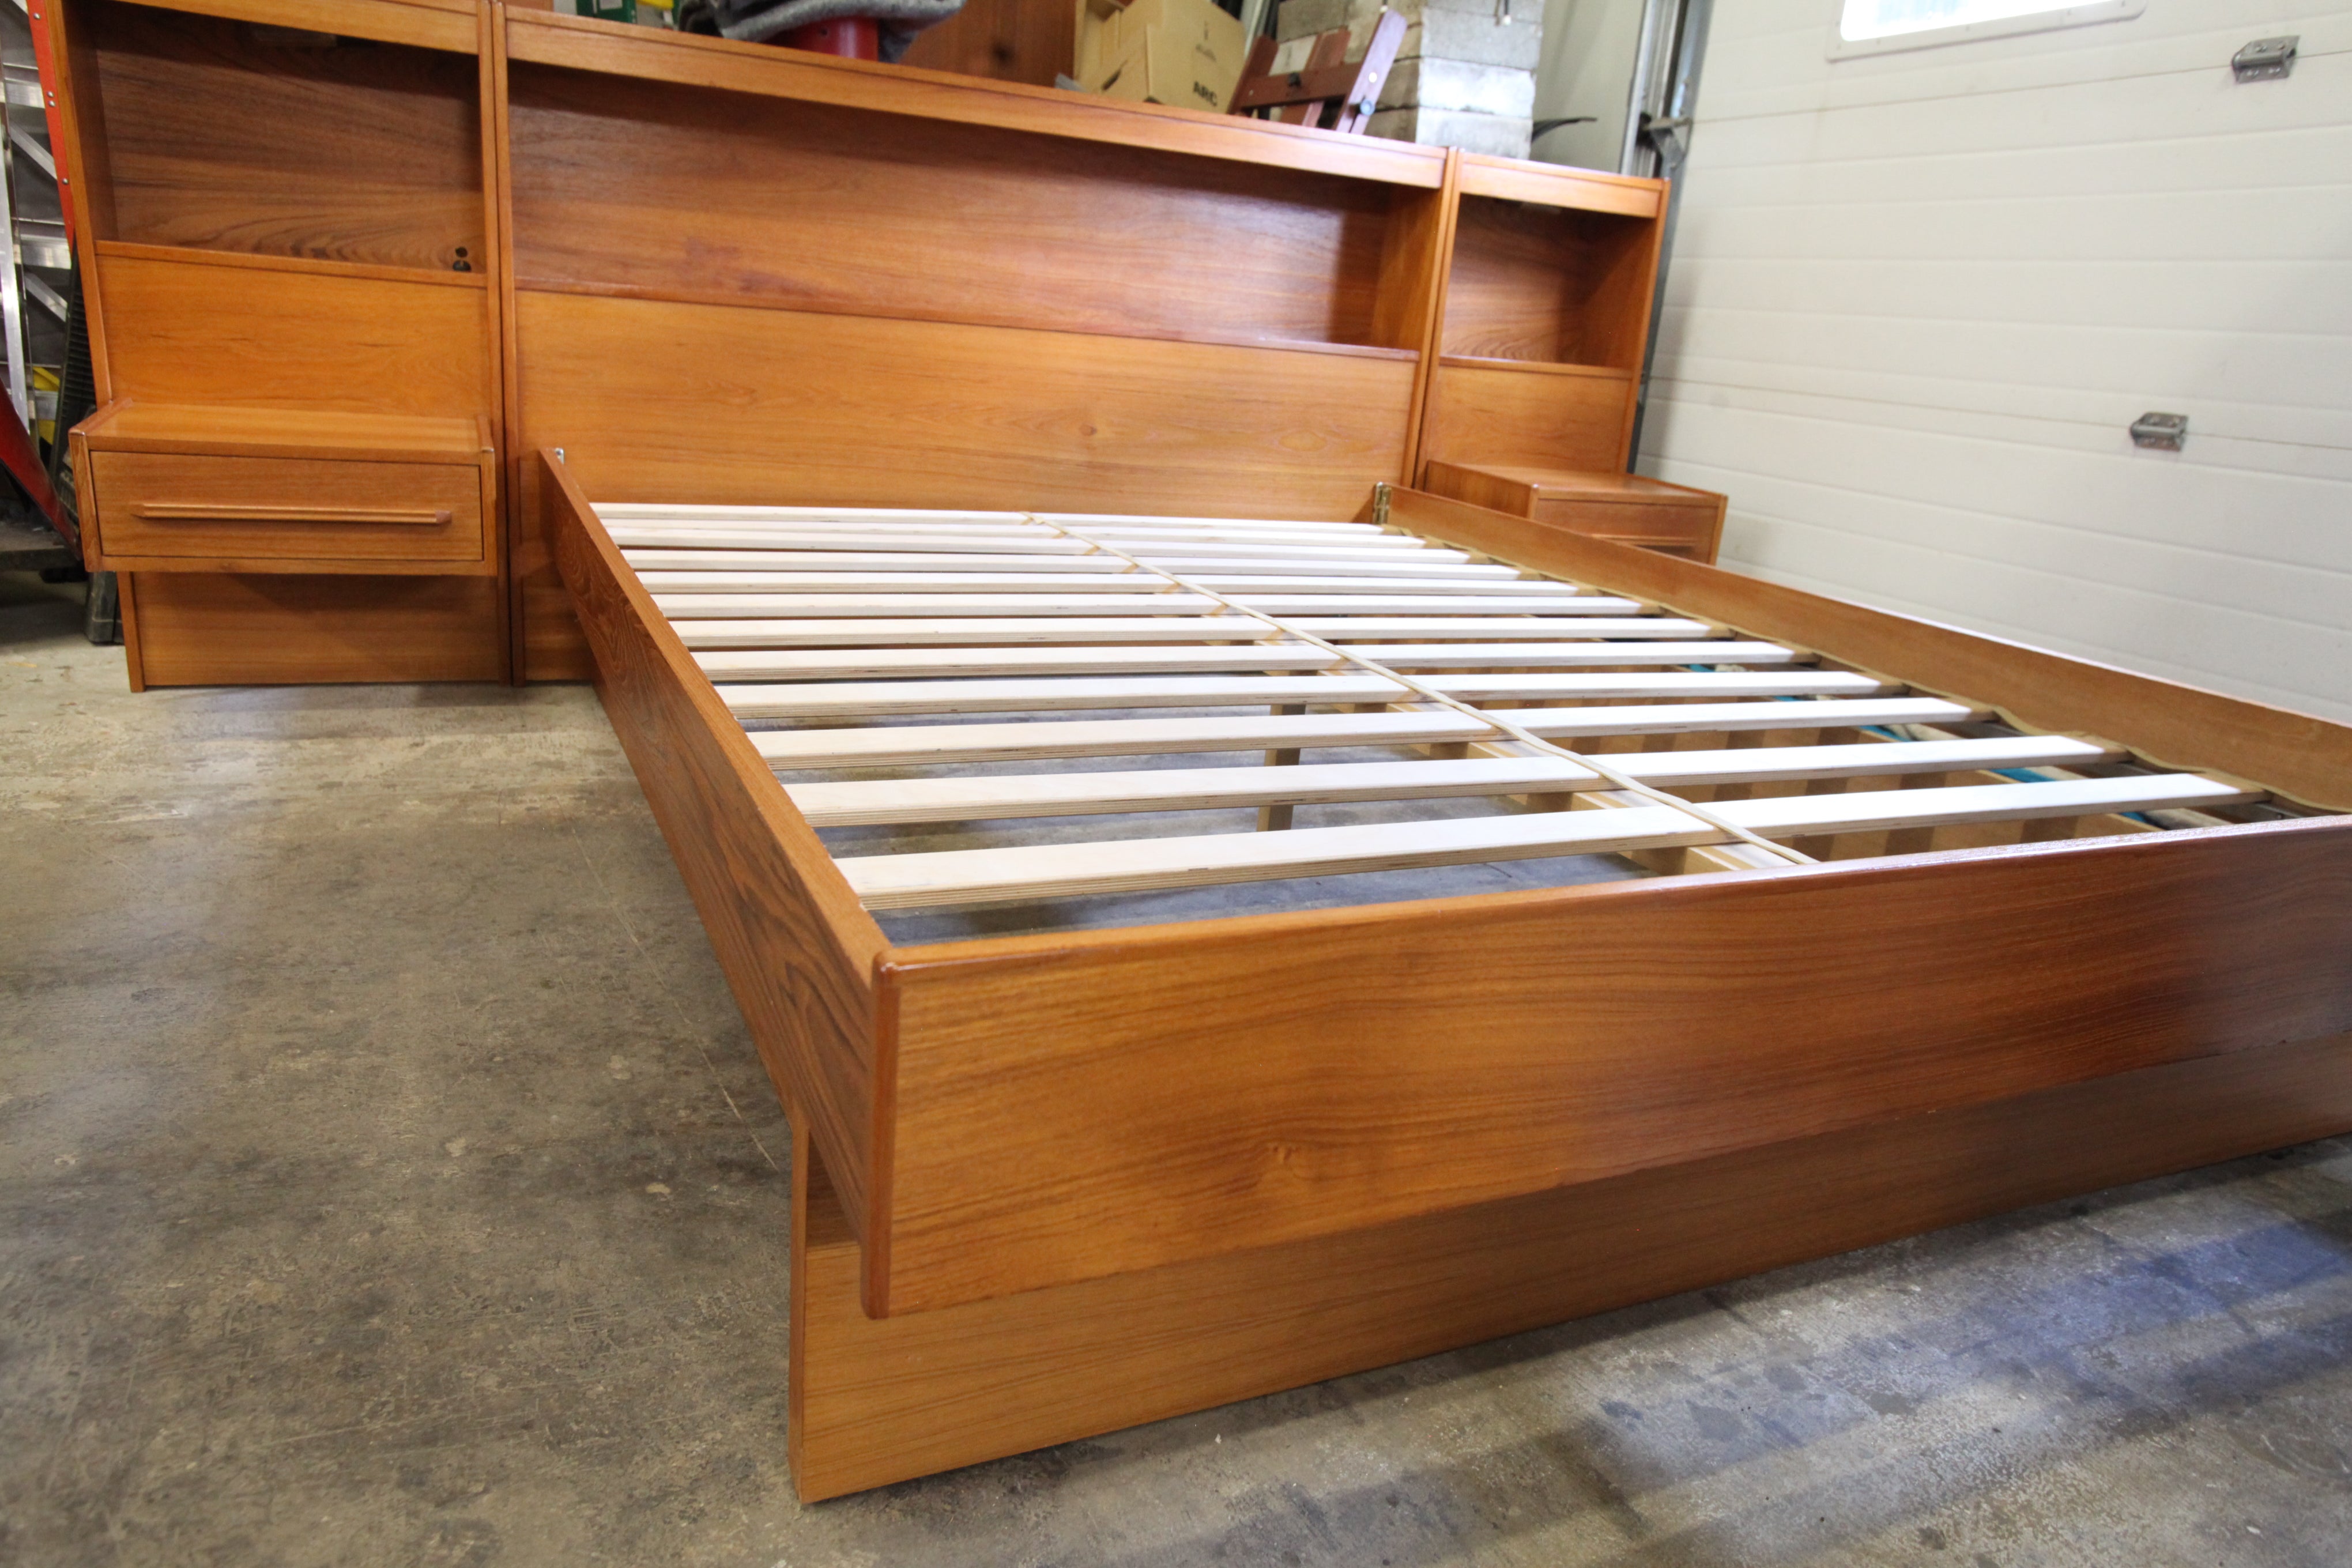 Vintage Queen Teak Bed w/ Floating Night Stands (107"W x 40"H)